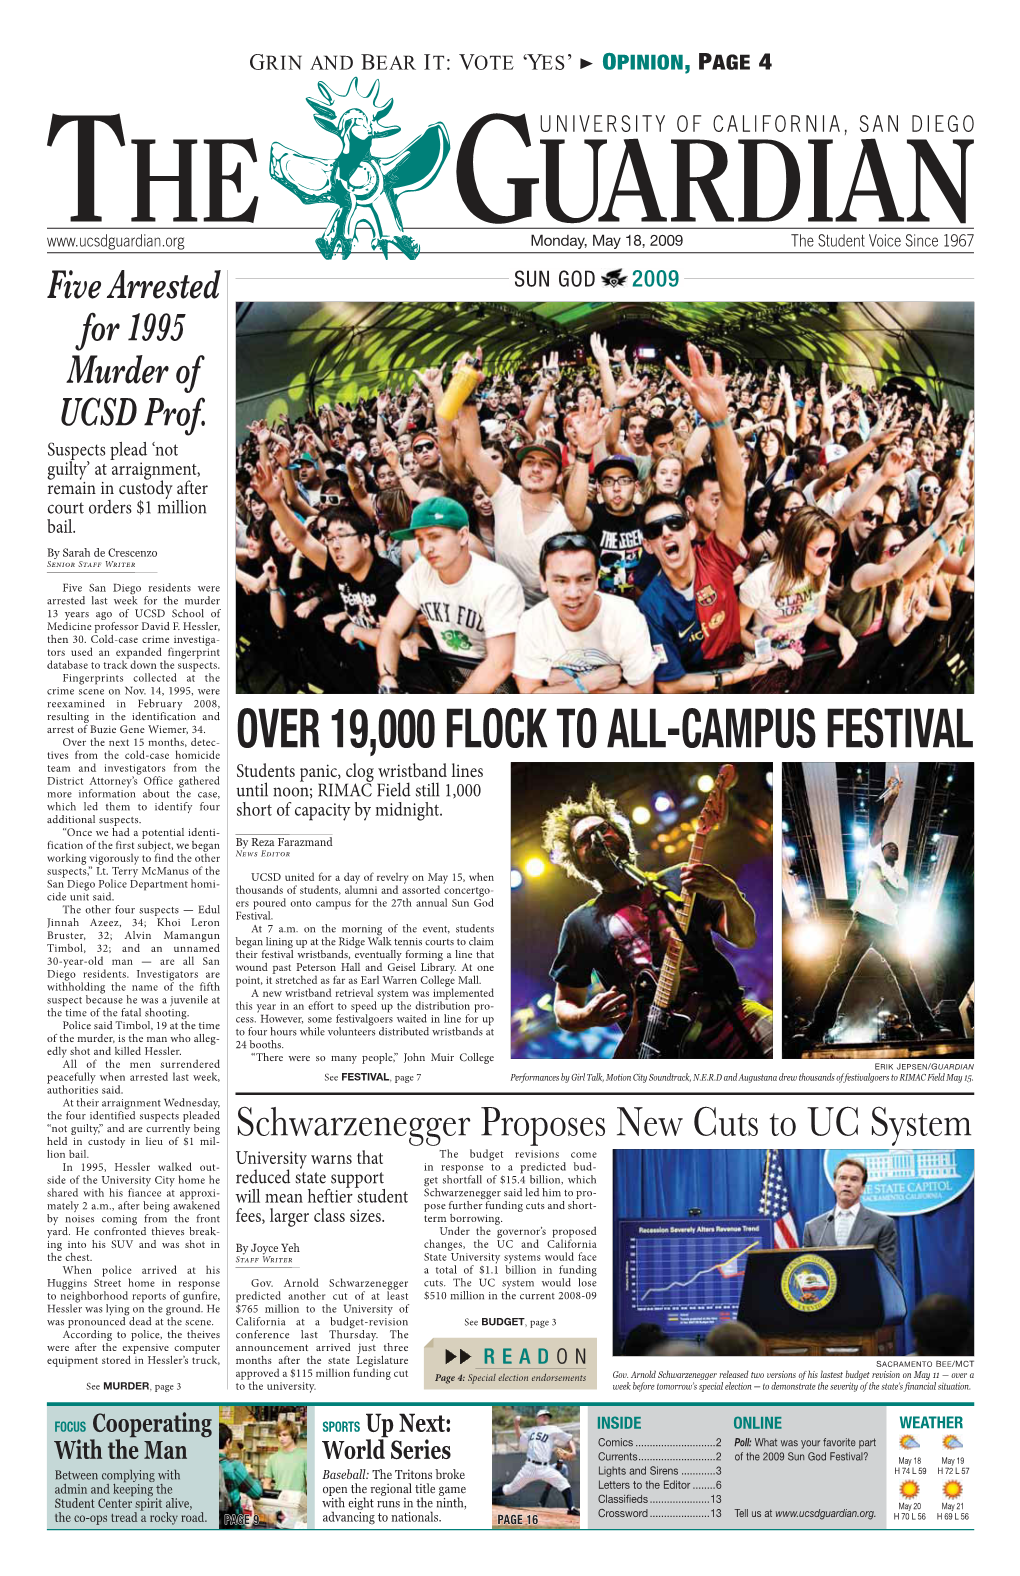 Over 19,000 Flock to All-Campus Festival